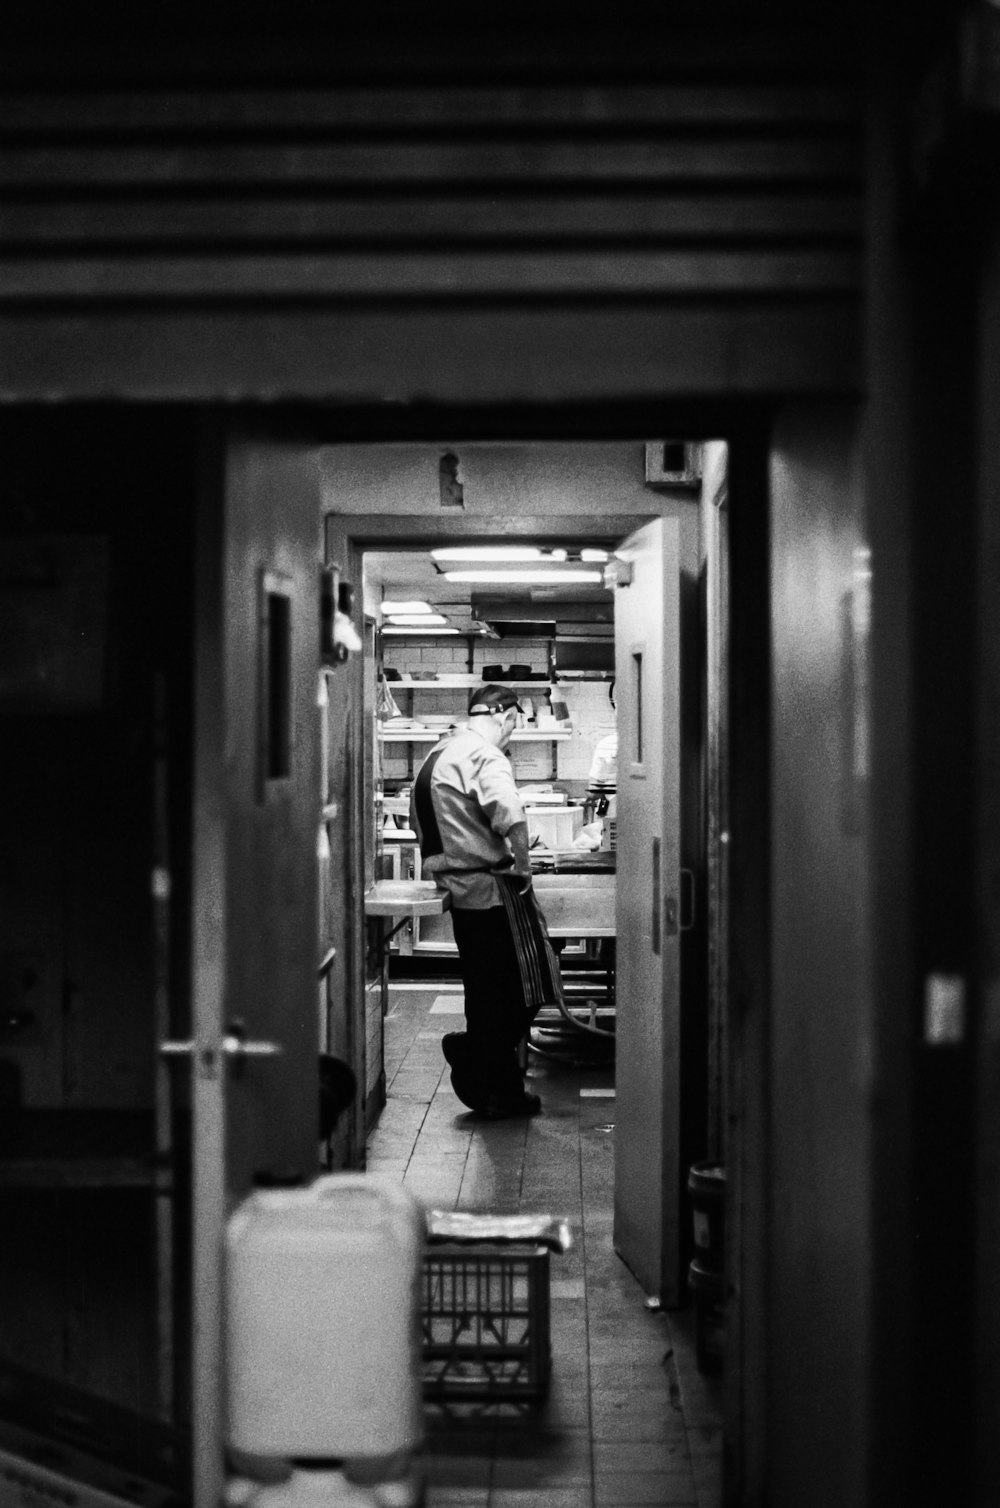 a man standing in a kitchen next to a refrigerator